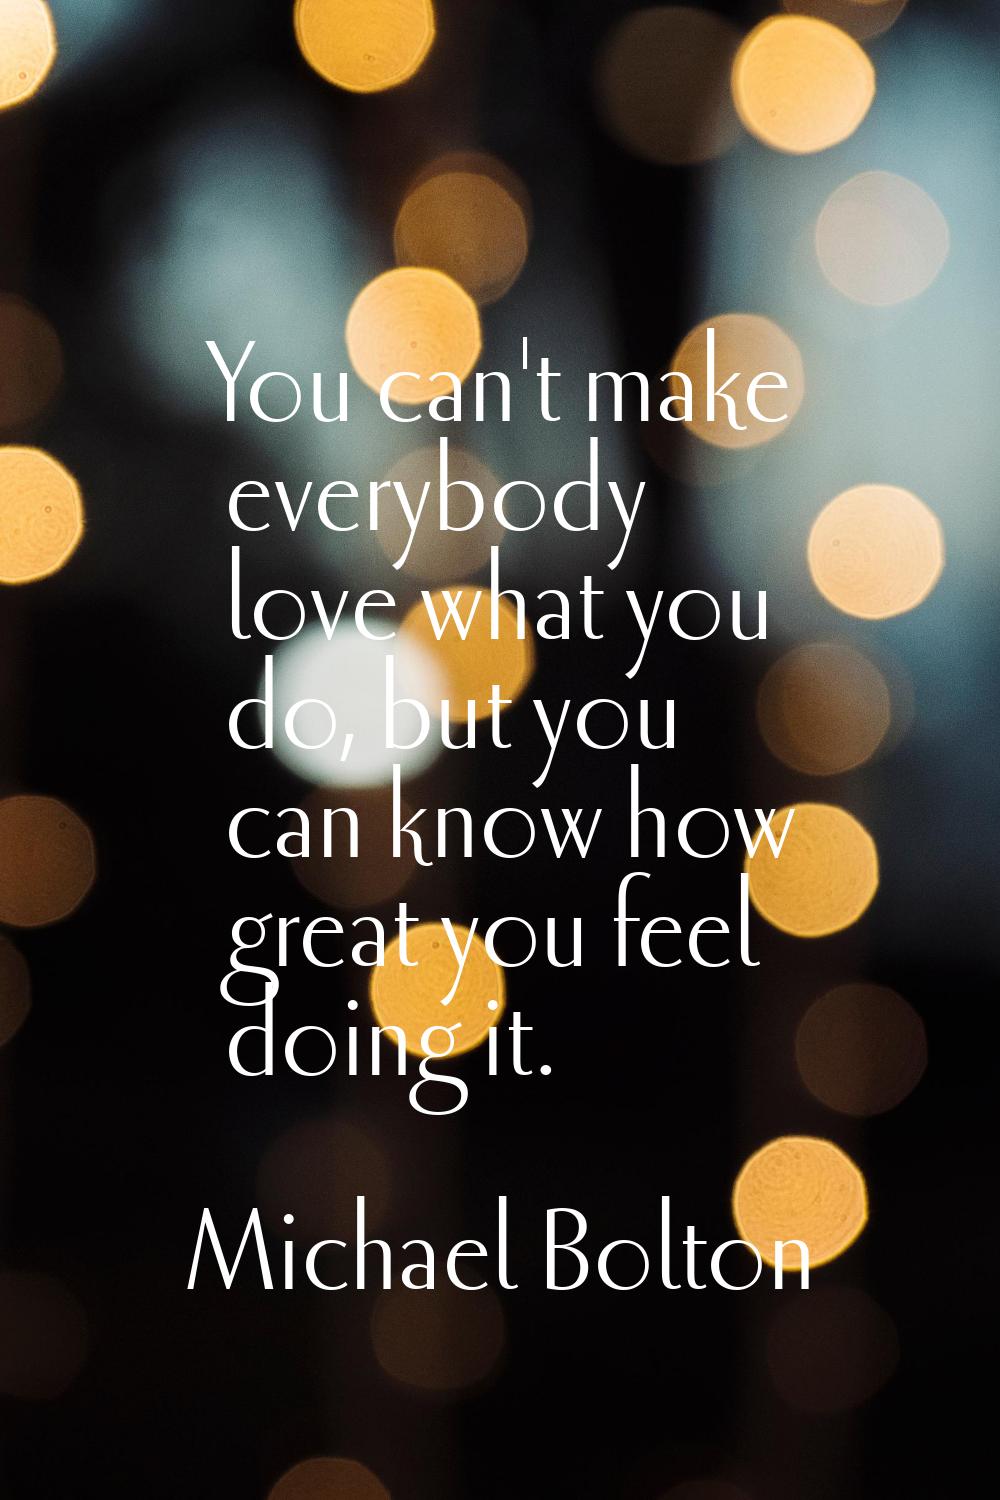 You can't make everybody love what you do, but you can know how great you feel doing it.